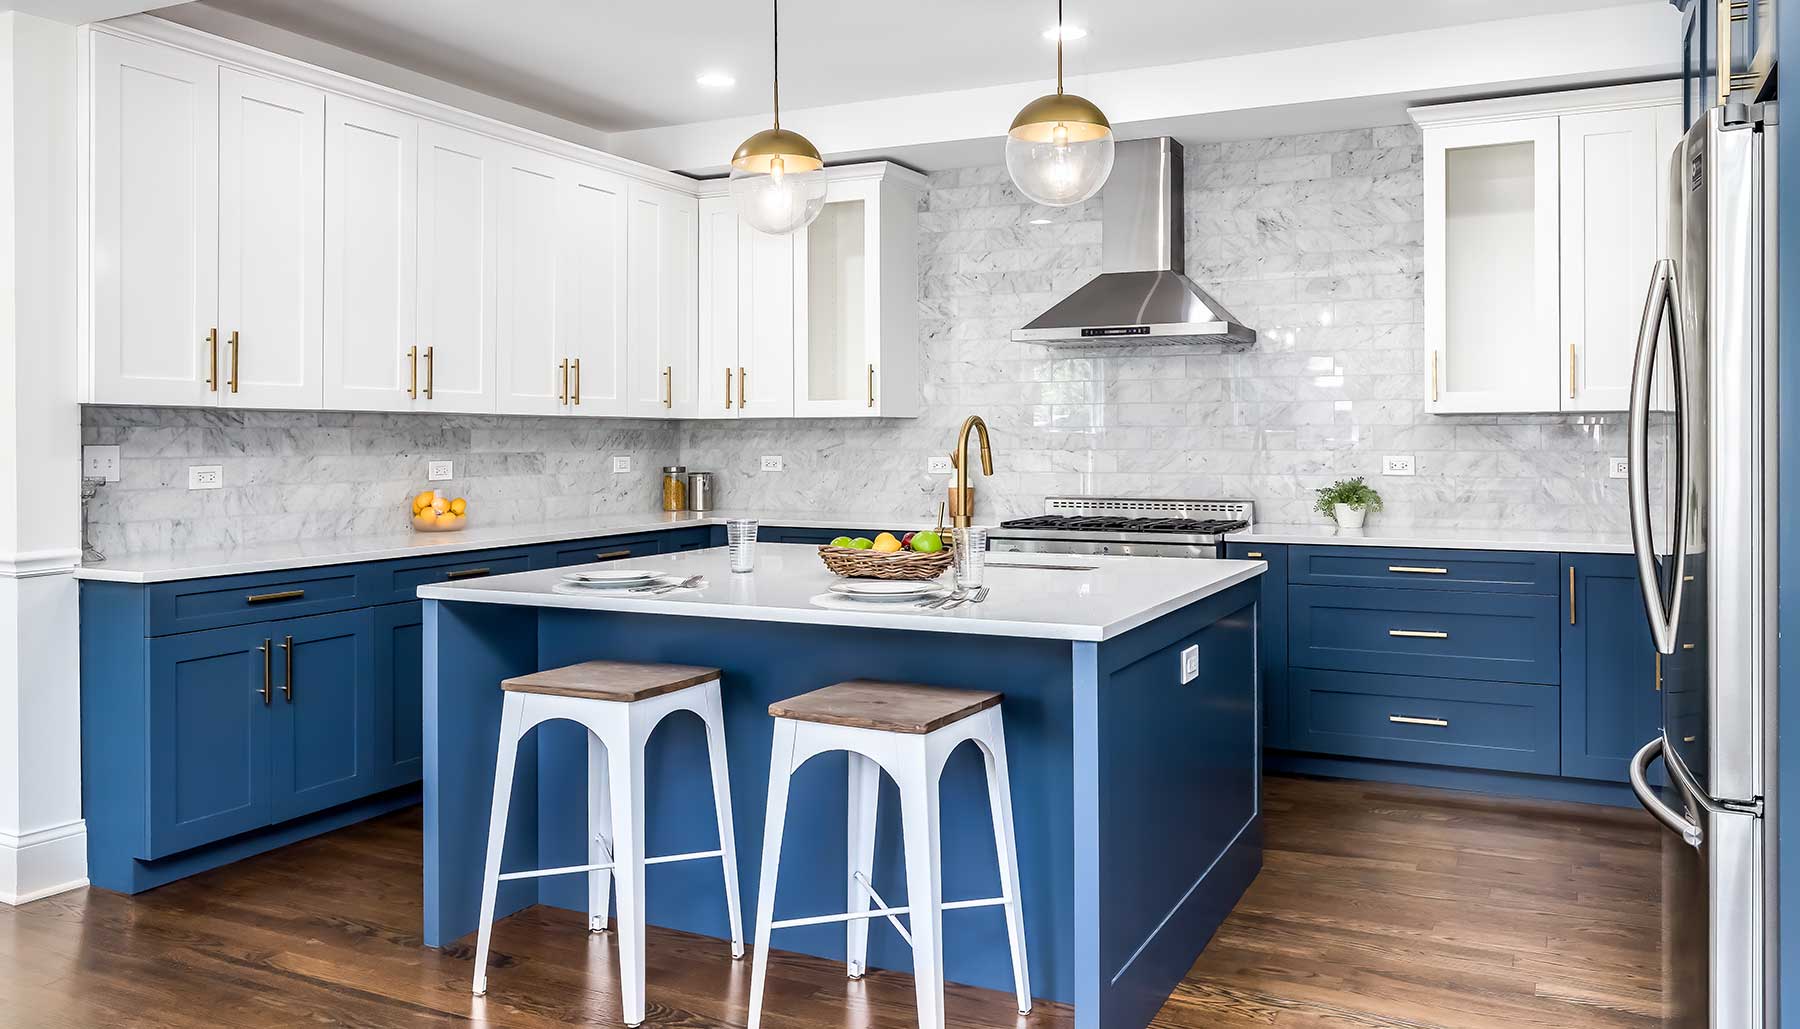 modern kitchen with gold fixtures and painted blue cabinets